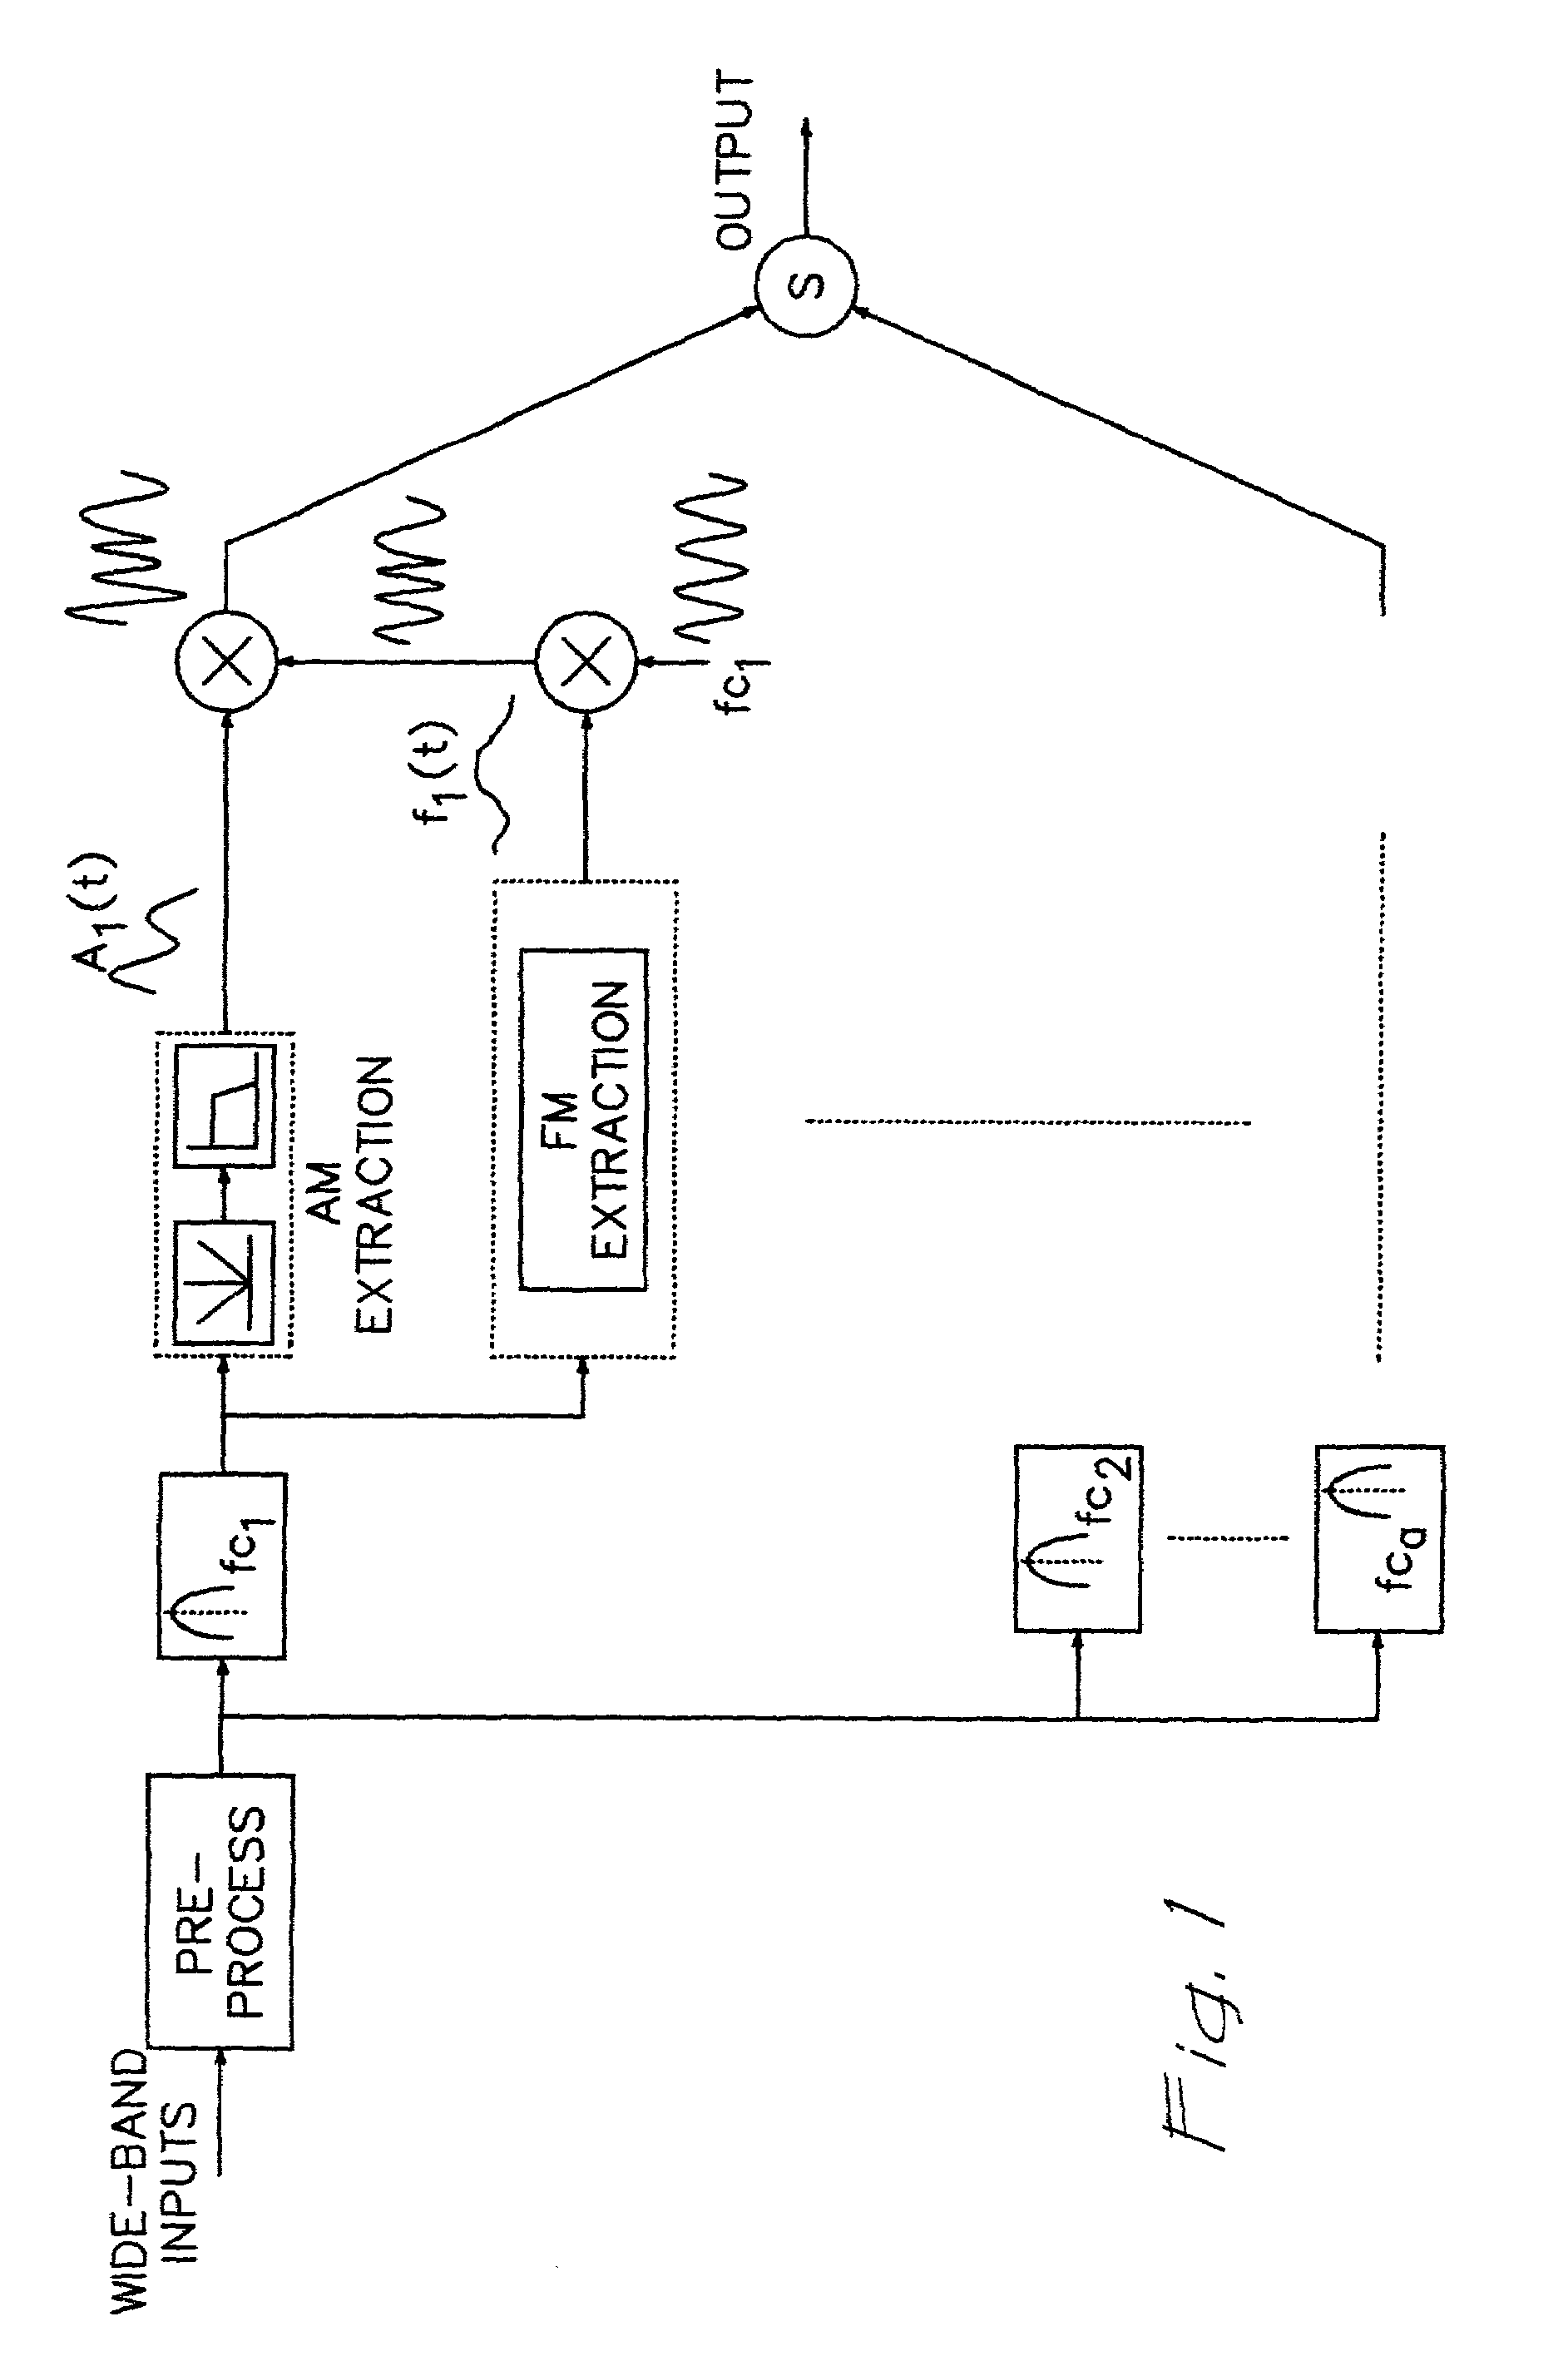 Cochlear implants and apparatus/methods for improving audio signals by use of frequency-amplitude-modulation-encoding (FAME) strategies